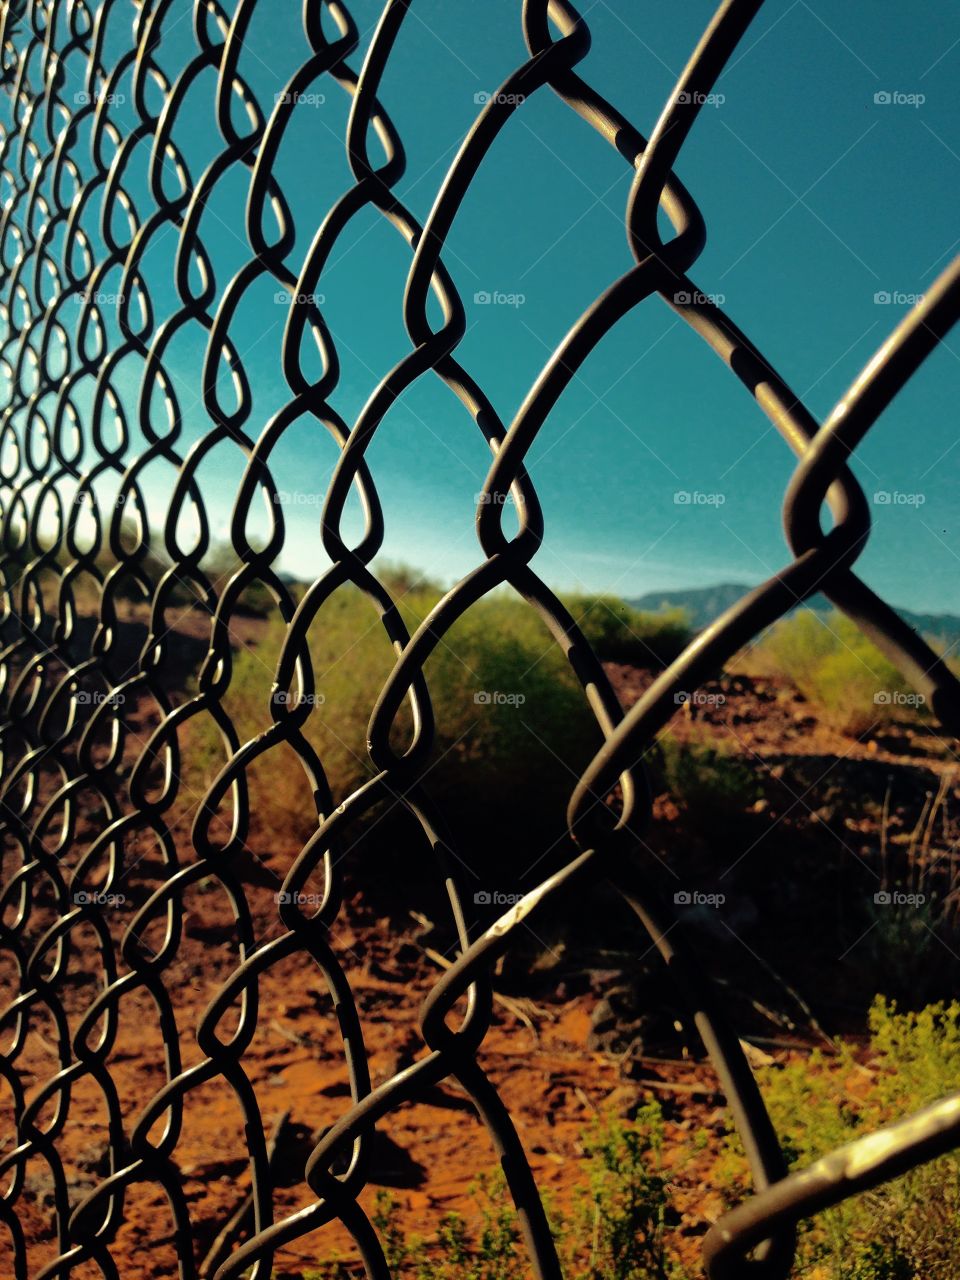 Gated Desert. Photo shot of an old fence gating off the desert 